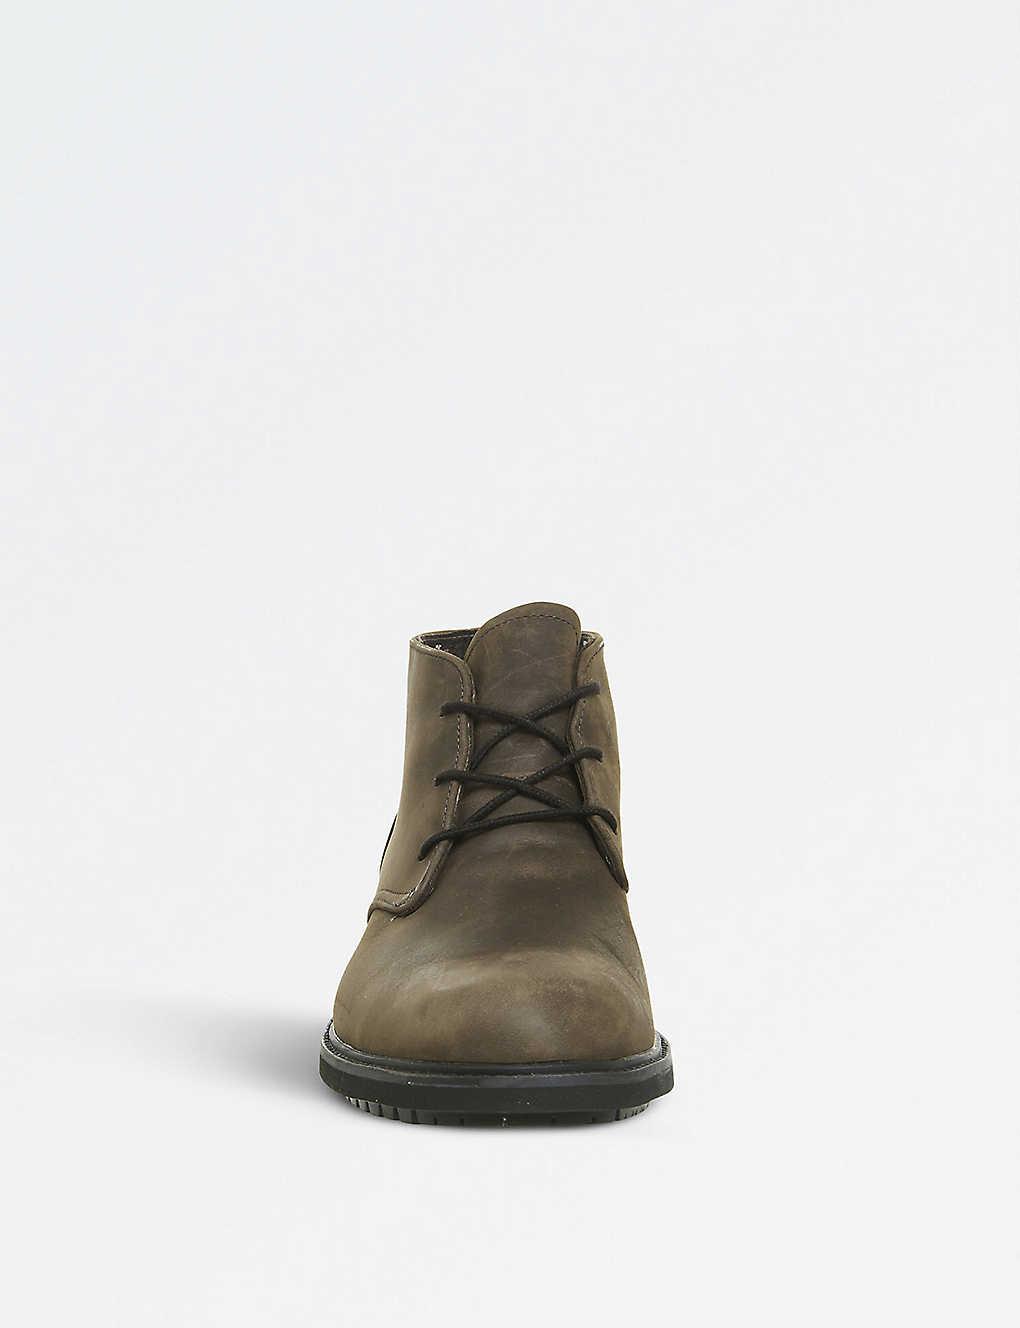 Timberland Stormbuck Chukka Leather Desert Boots in Brown for Men | Lyst